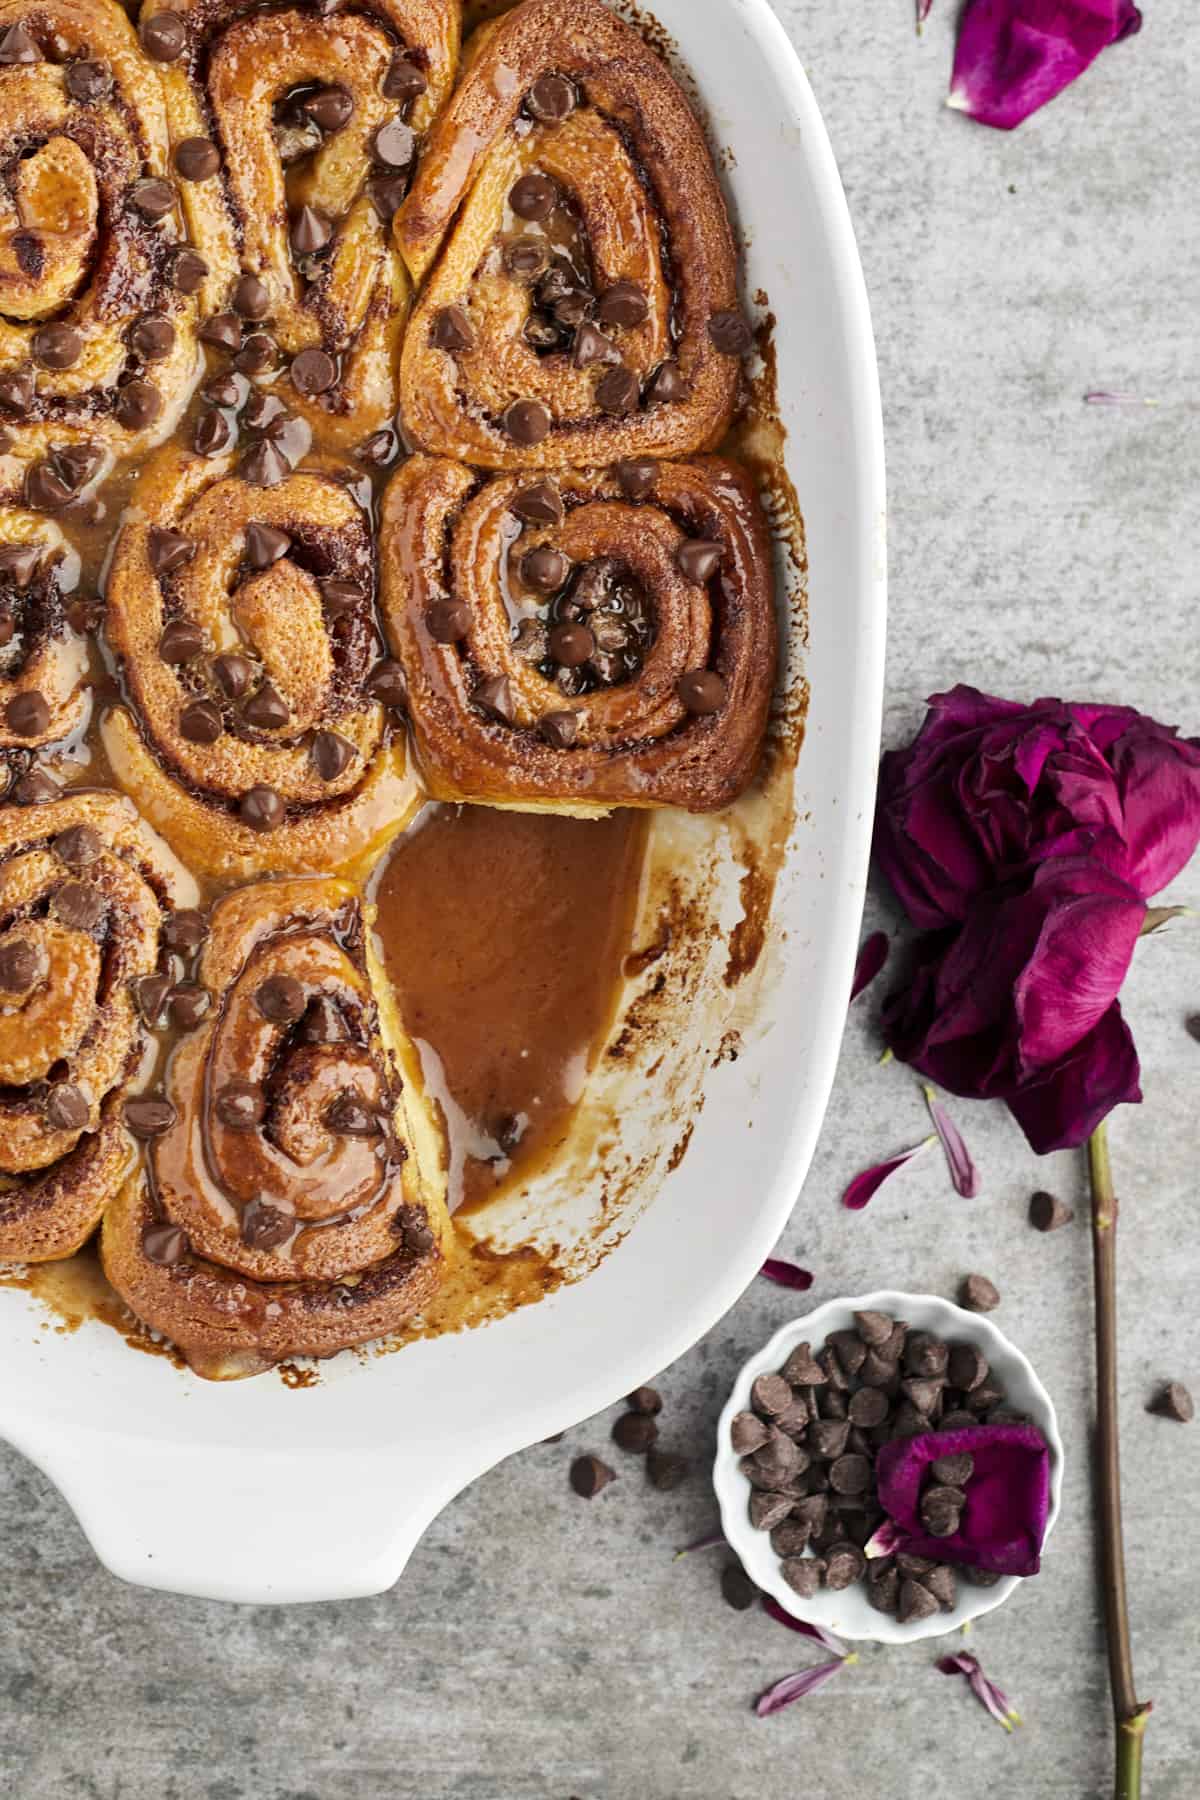 baked easy cinnamon rolls topped with caramel and chocolate chips in a white baking dish with one cinnamon roll missing